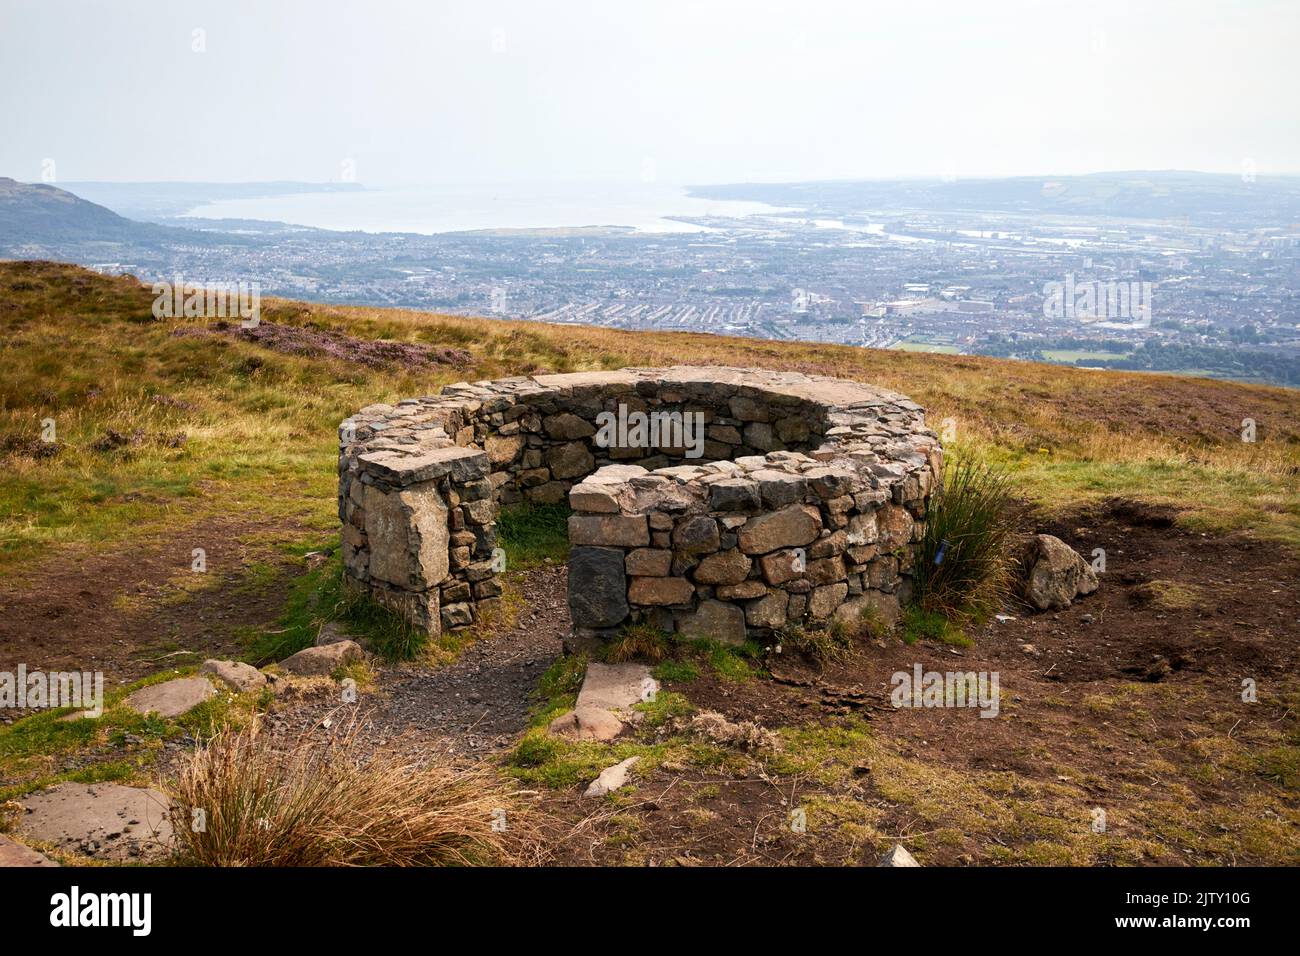 local stone basalt viewpoint at the summit of Black mountain in divis and black mountain belfast hills range overlooking belfast northern ireland Stock Photo